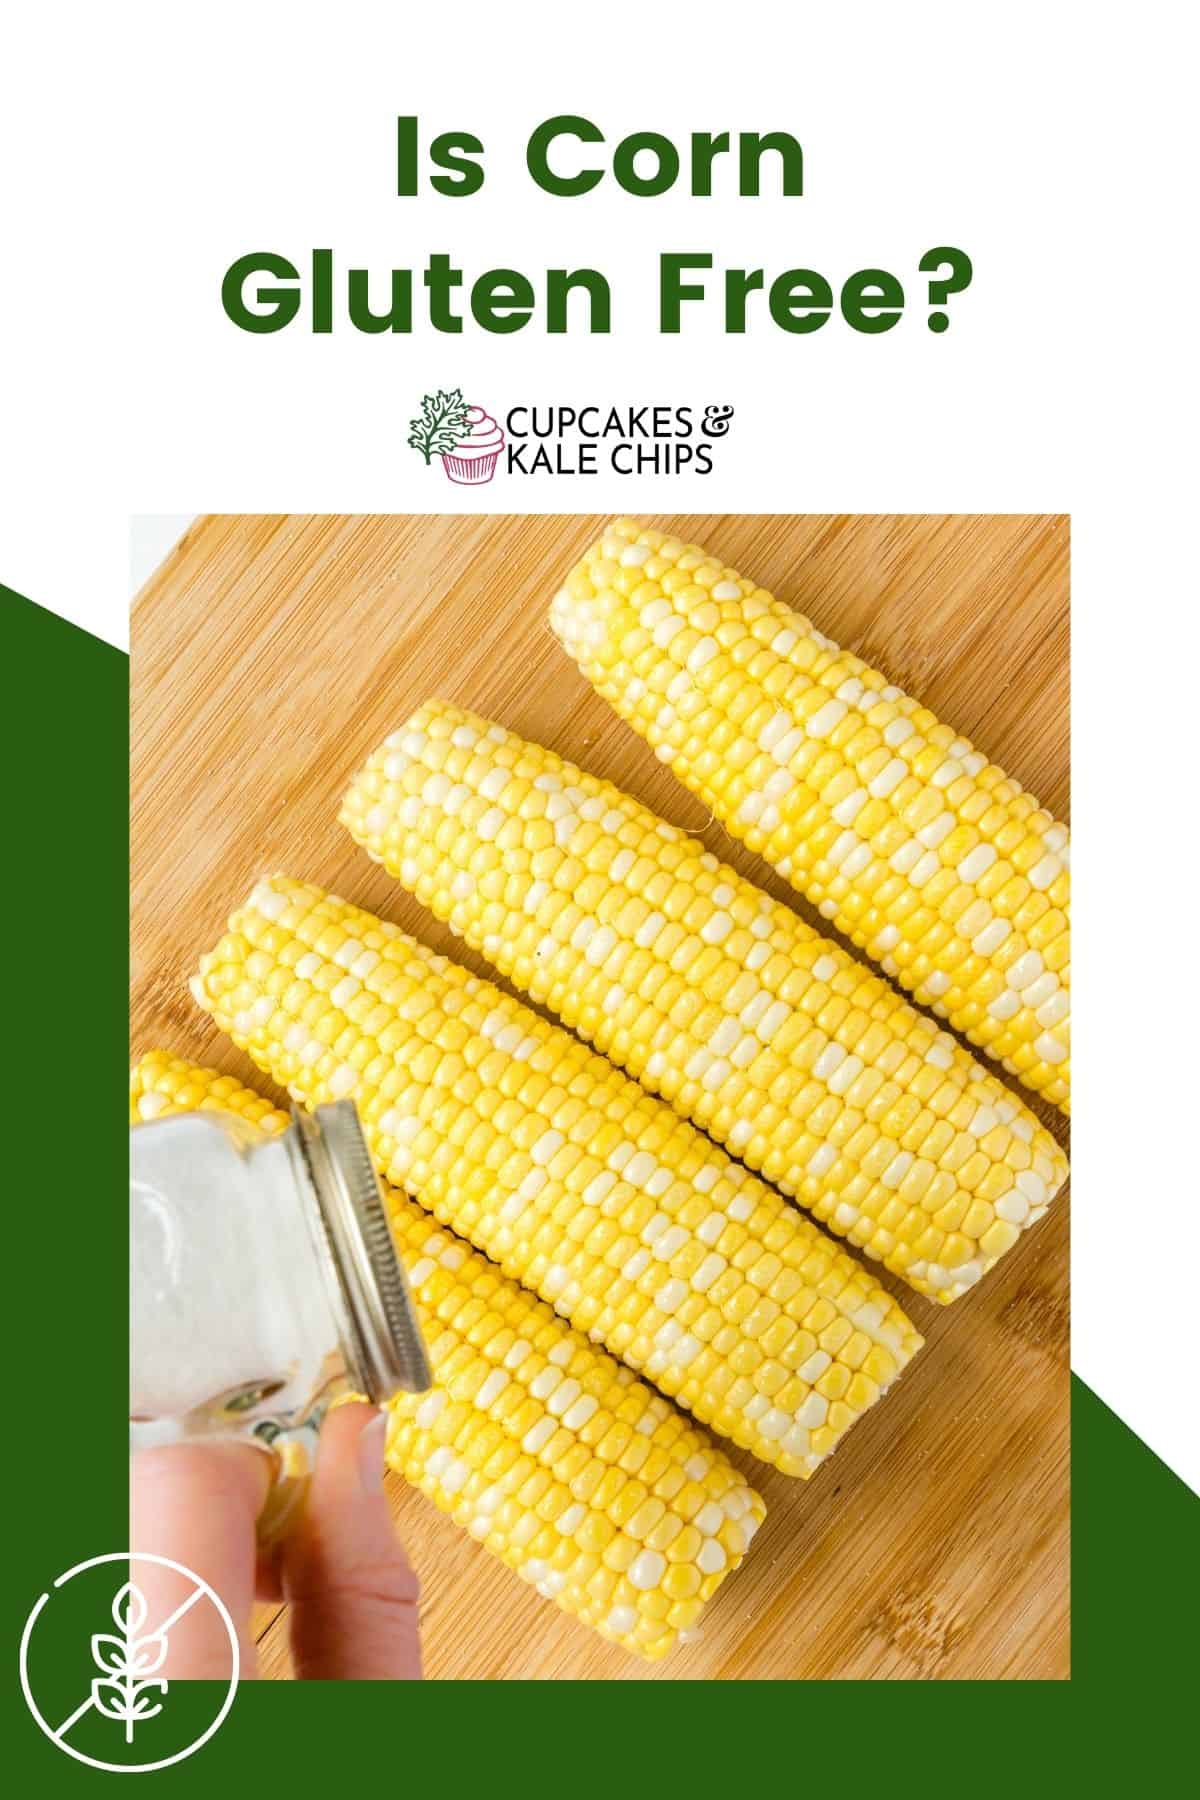 A photo of salt being shaken onto raw ears of corn on the cob on a green and white background with text overlay that says "Is Corn Gluten Free?".